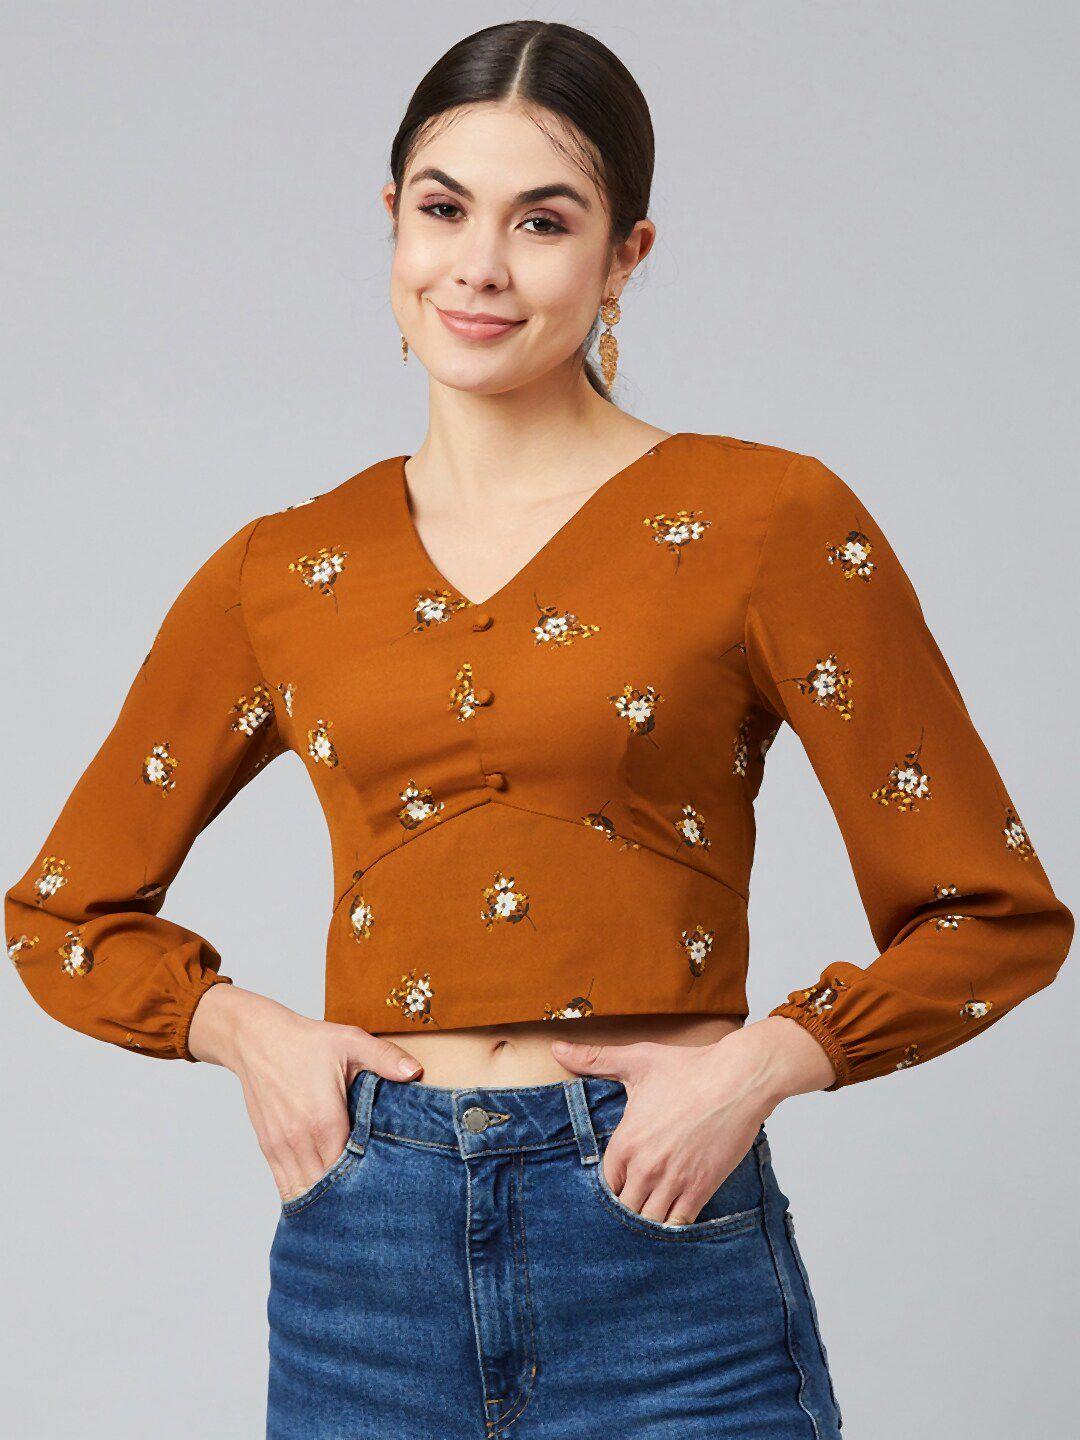 marie claire women brown & white floral georgette fitted crop top